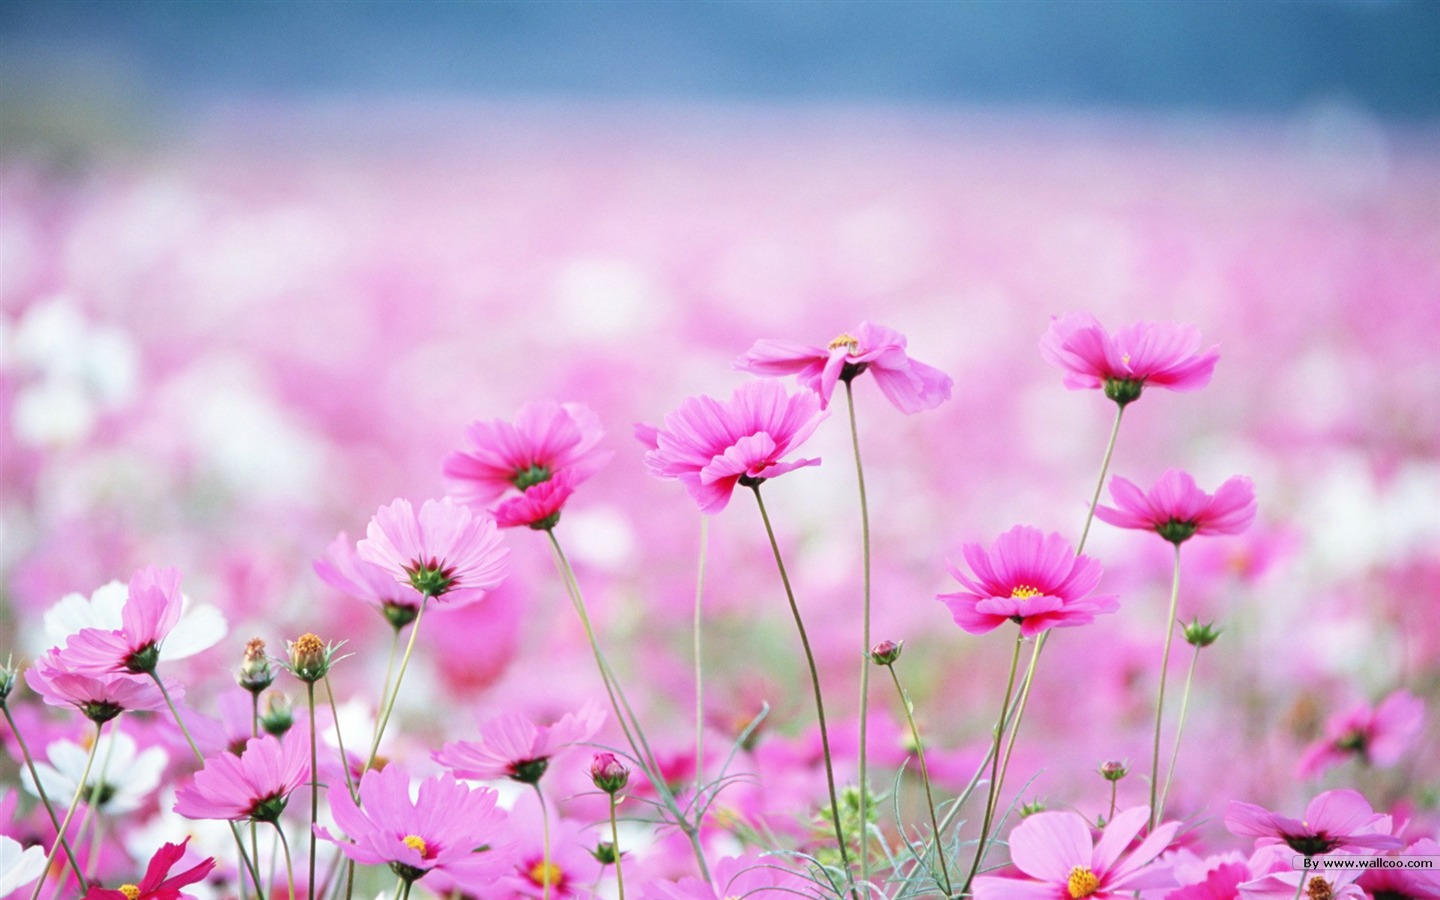 Fresh style Flowers Wallpapers #23 - 1440x900